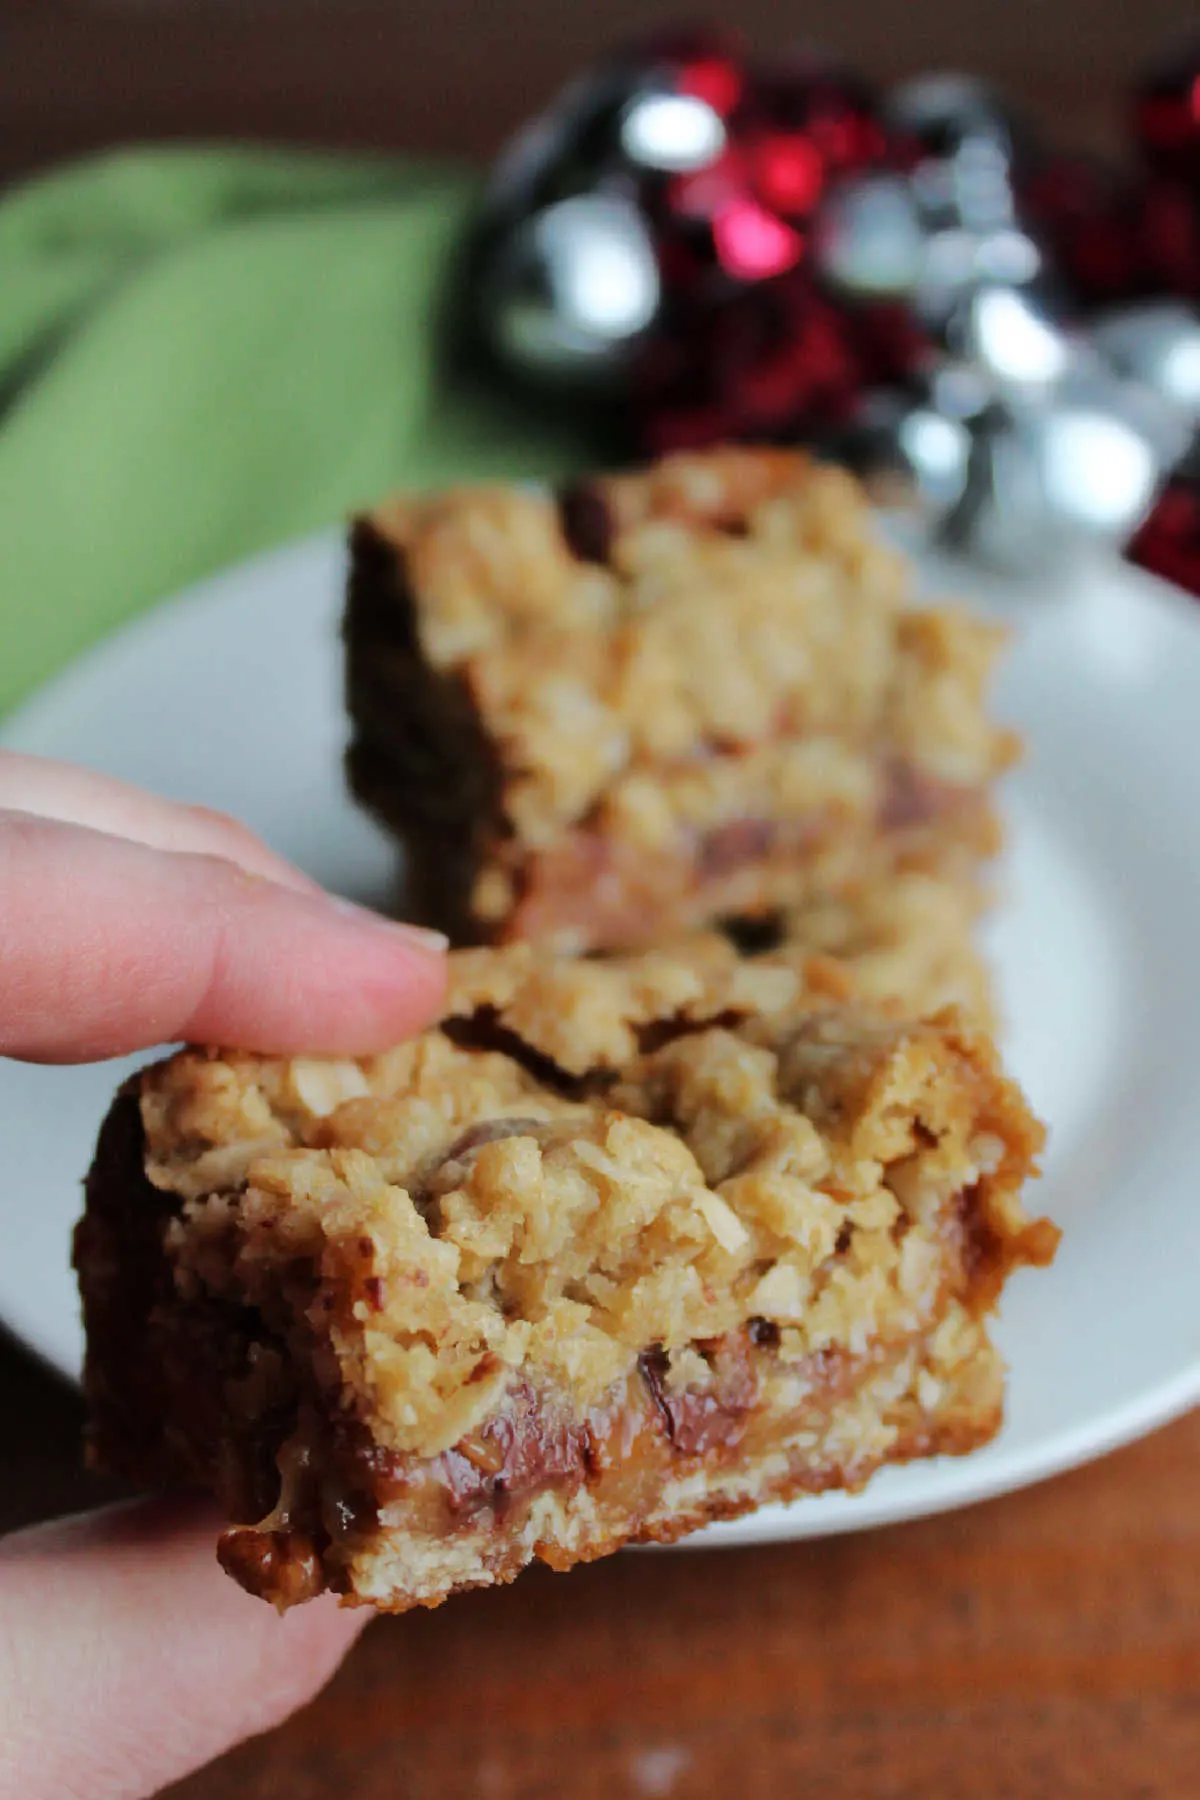 Hand holding oatmeal caramelita bar with gooey caramel, chocolate and pecan center showing.